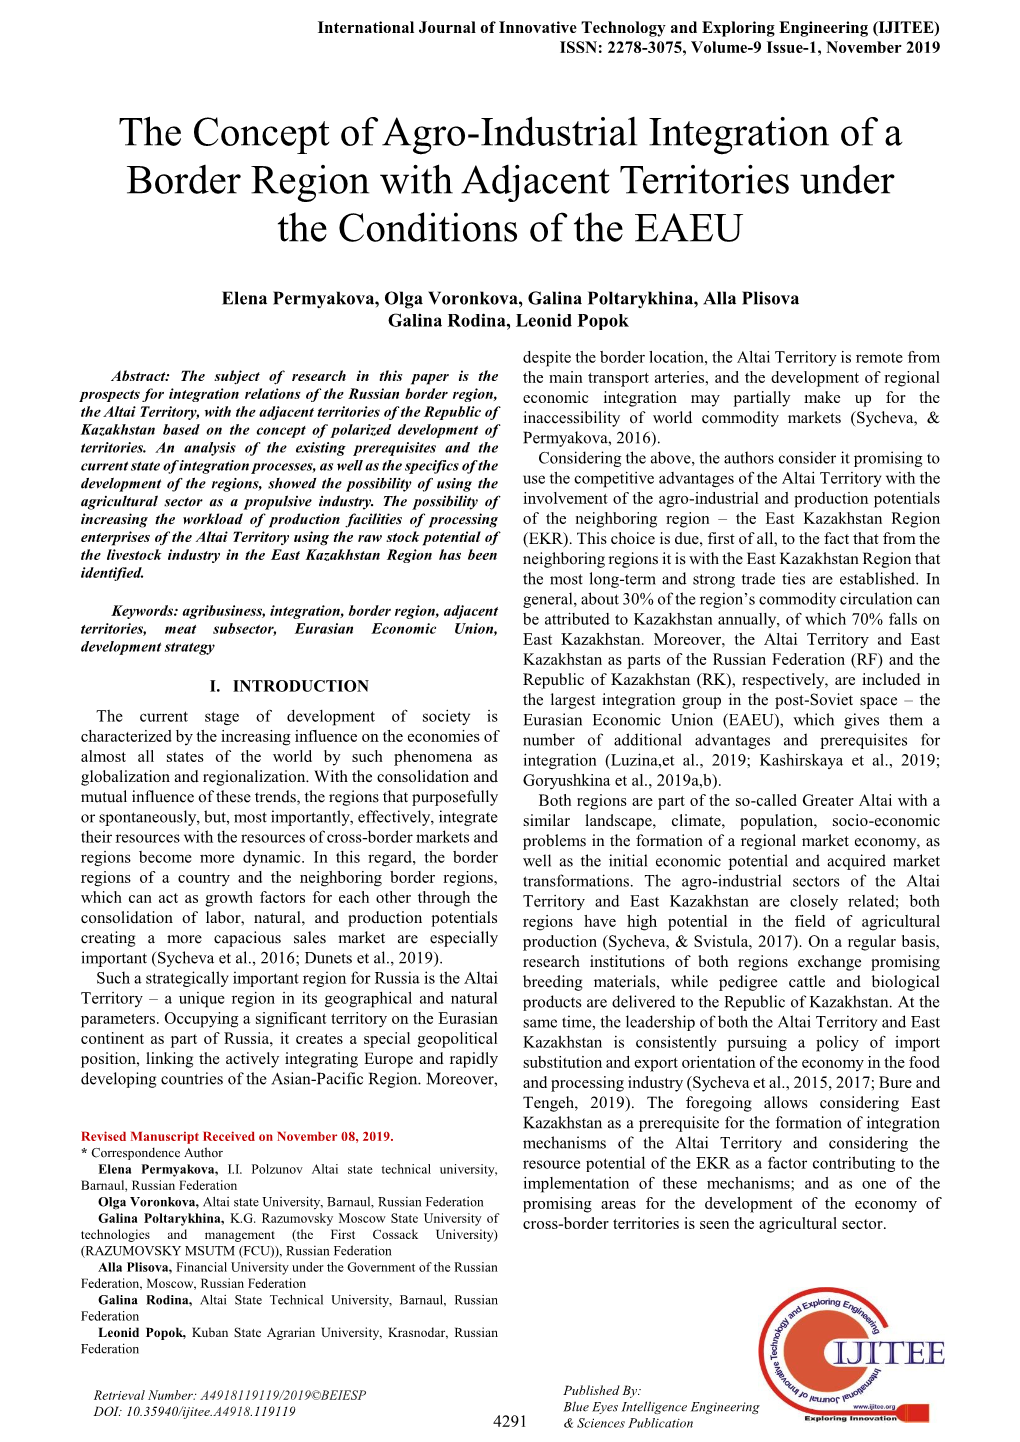 The Concept of Agro-Industrial Integration of a Border Region with Adjacent Territories Under the Conditions of the EAEU